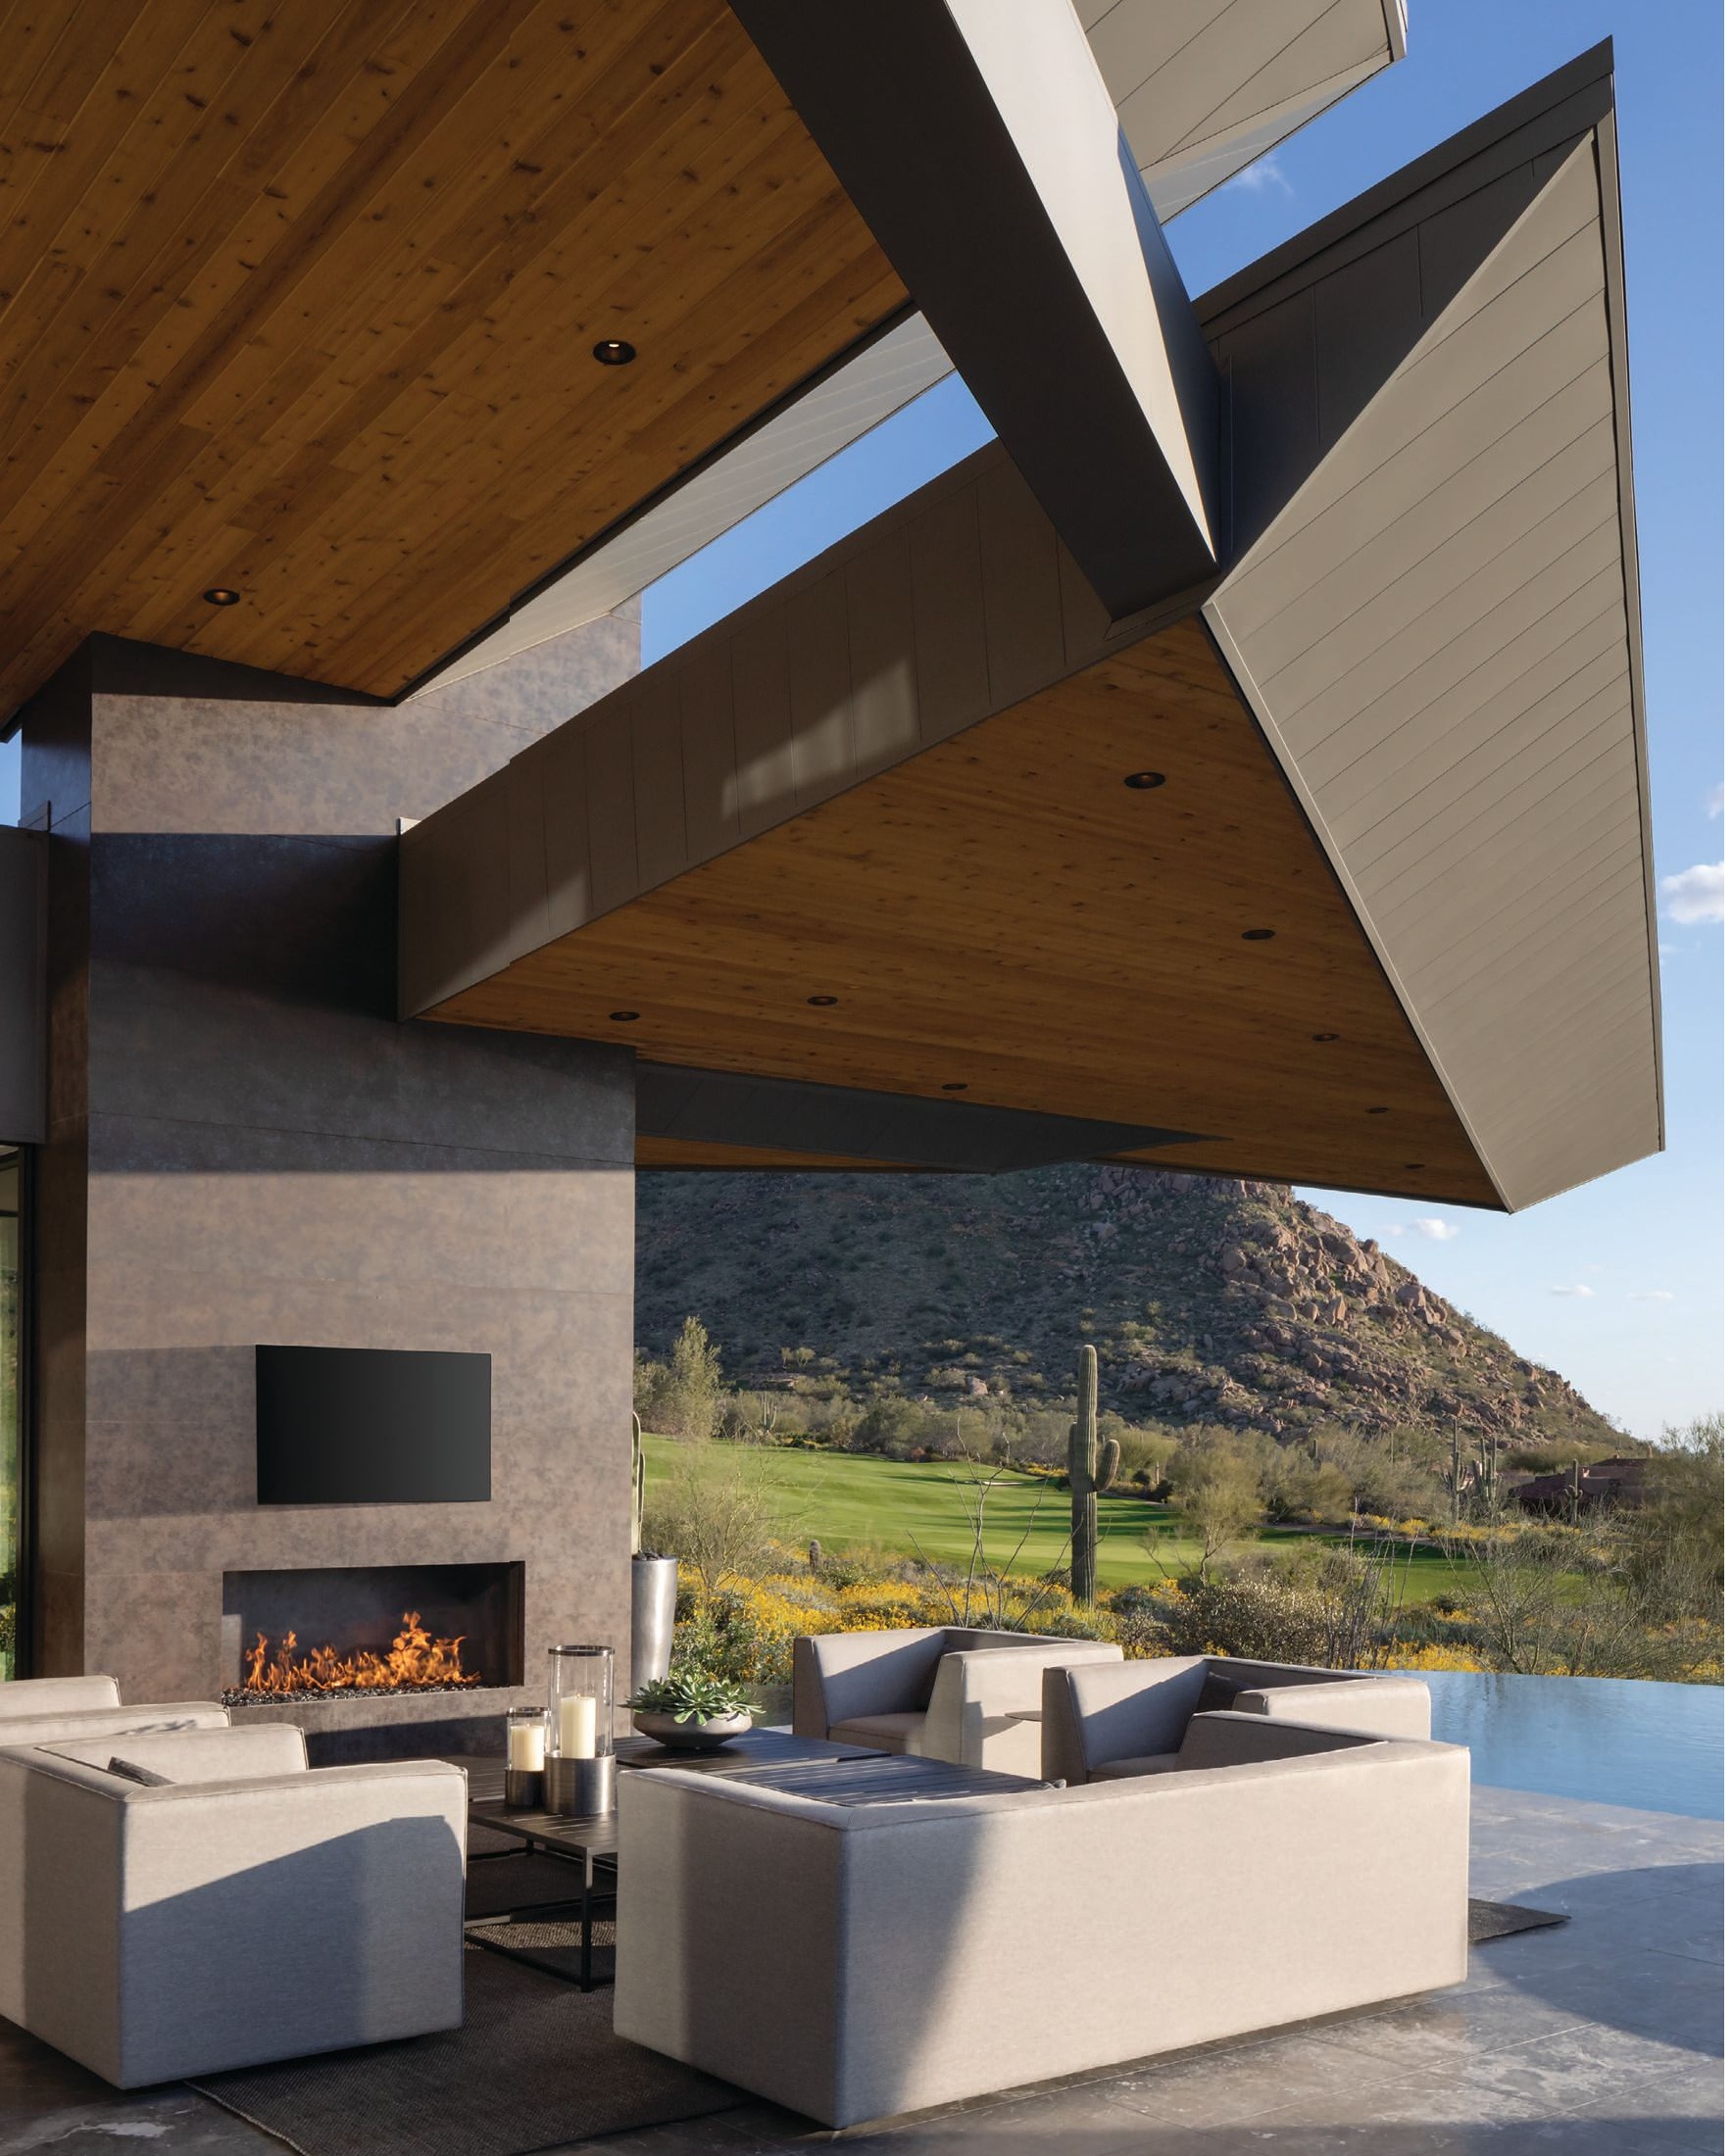 Looking toward the patio, the home’s aerodynamic architecture is on full display. “The fireplace helps protect the patio from visibility from the road,” says Drewett. “It provides this kind of safe harbor PHOTOGRAPHED BY JEFF ZARUBA